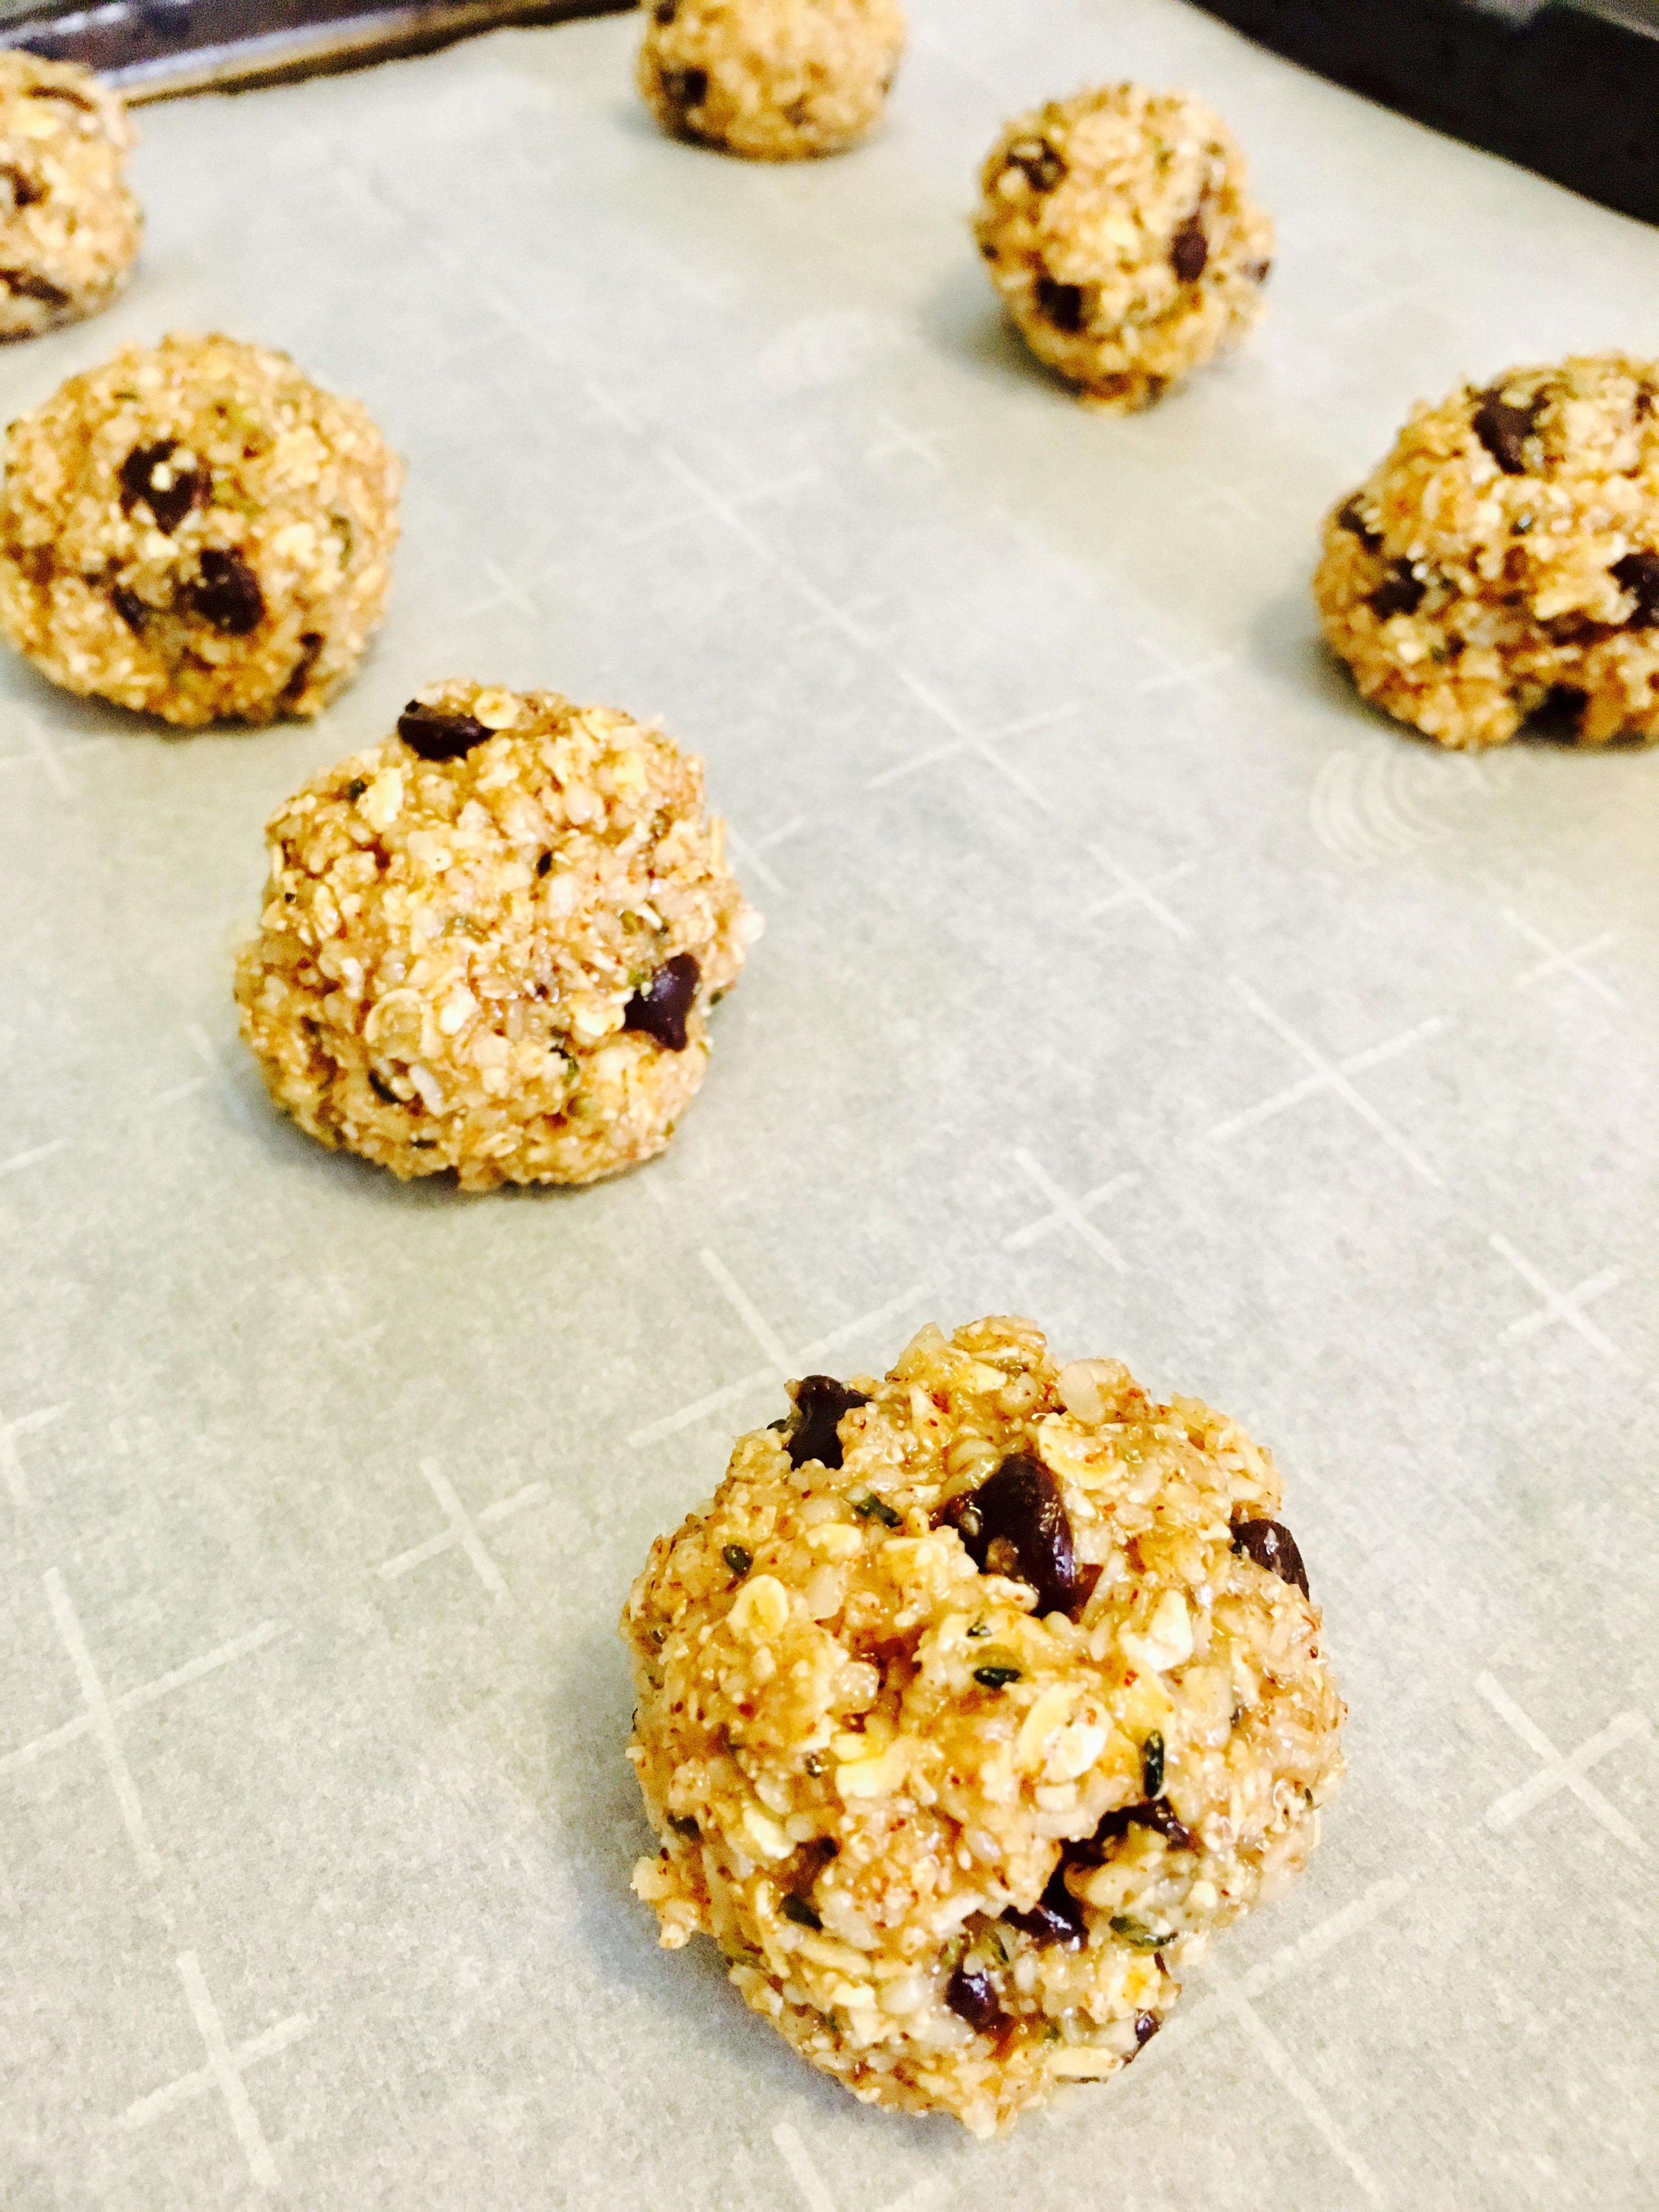 These Oatmeal Hemp Seed Cookie Bites are a delicious marriage of chocolate chip oatmeal cookies and coconut macaroons. Best of all, they’re packed with nutrient-rich ingredients like oats, dark chocolate, and hemp seed.